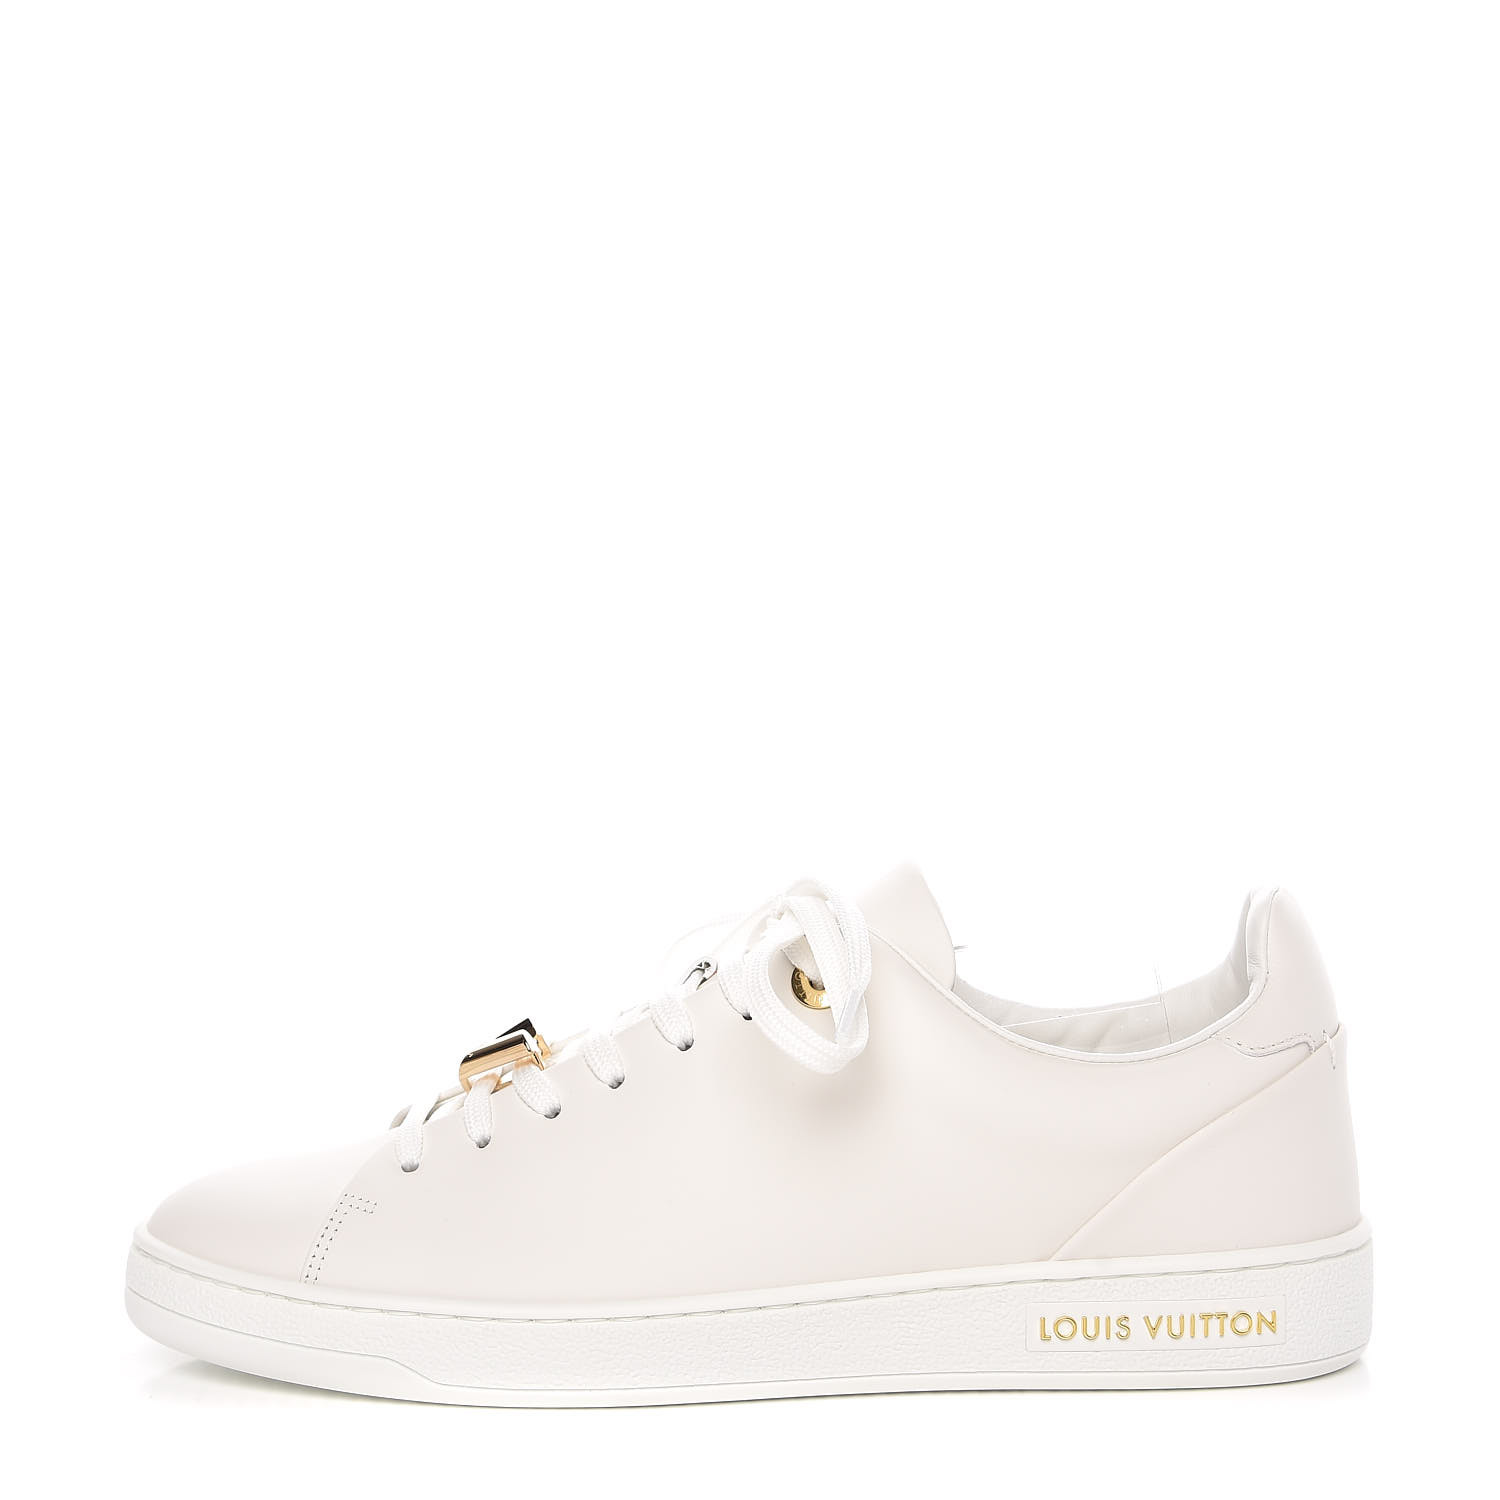 louis vuitton sneakers white and gold